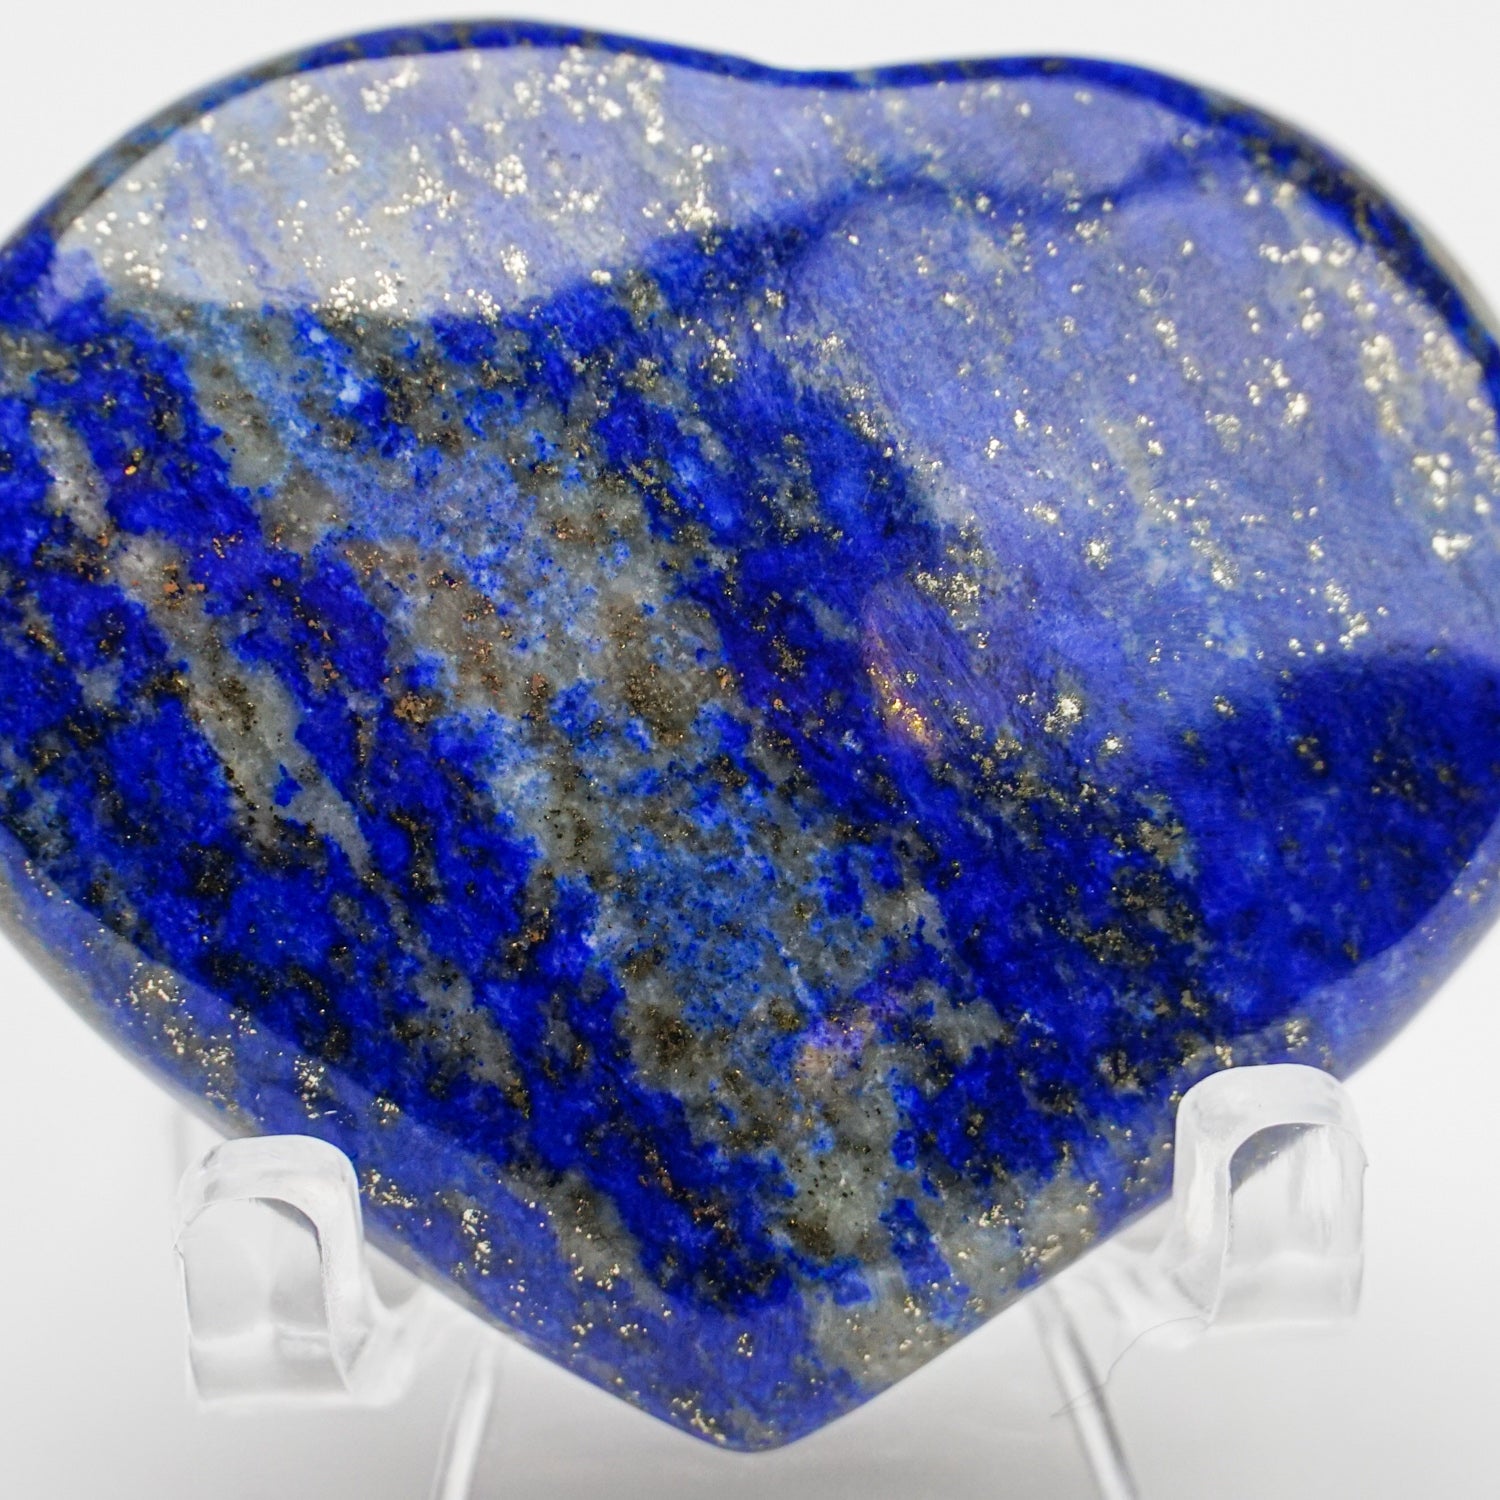 Polished Lapis Lazuli Heart from Afghanistan (34.2 grams)